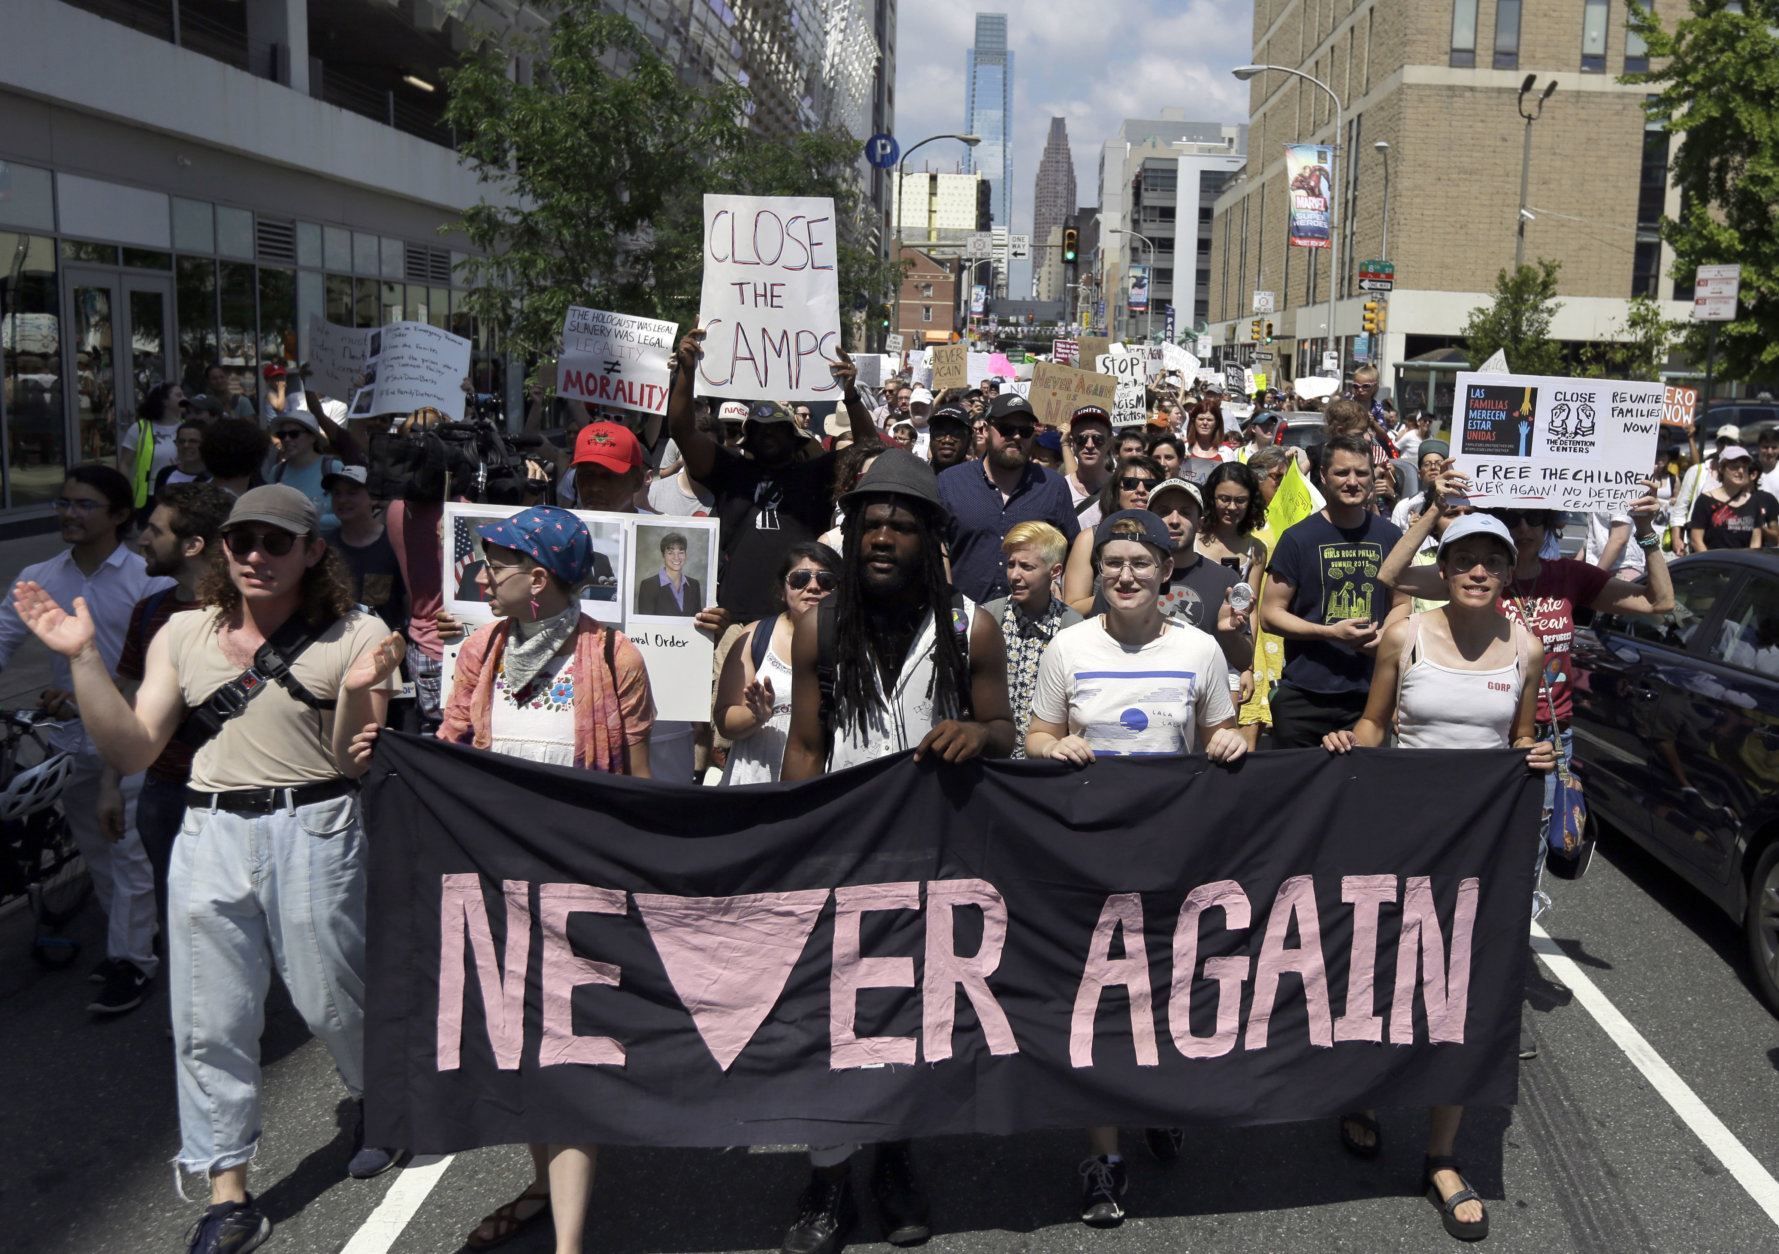 Protestors assembled by a majority Jewish group called "Never Again Is Now" walk through traffic as they make their way to Independence Mall Thursday July 4, 2019, in Philadelphia. Hundreds gathered during the city's traditional Fourth of July parade to protest the treatment of immigrants and asylum seekers. (AP Photo/Jacqueline Larma)